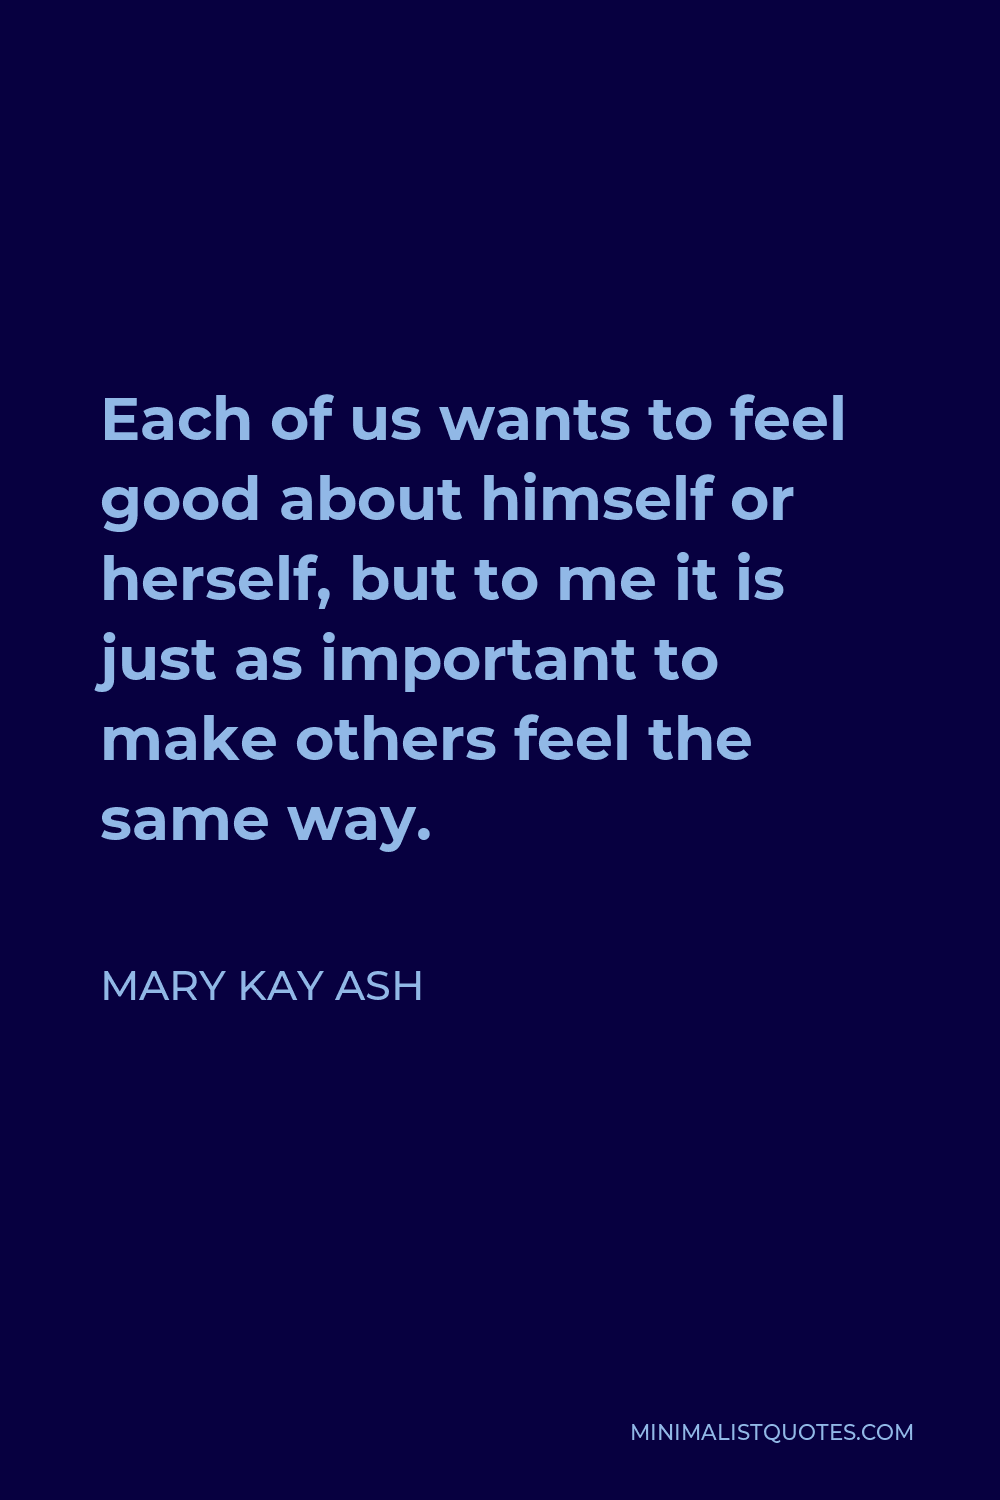 Mary Kay Ash Quote - Each of us wants to feel good about himself or herself, but to me it is just as important to make others feel the same way.